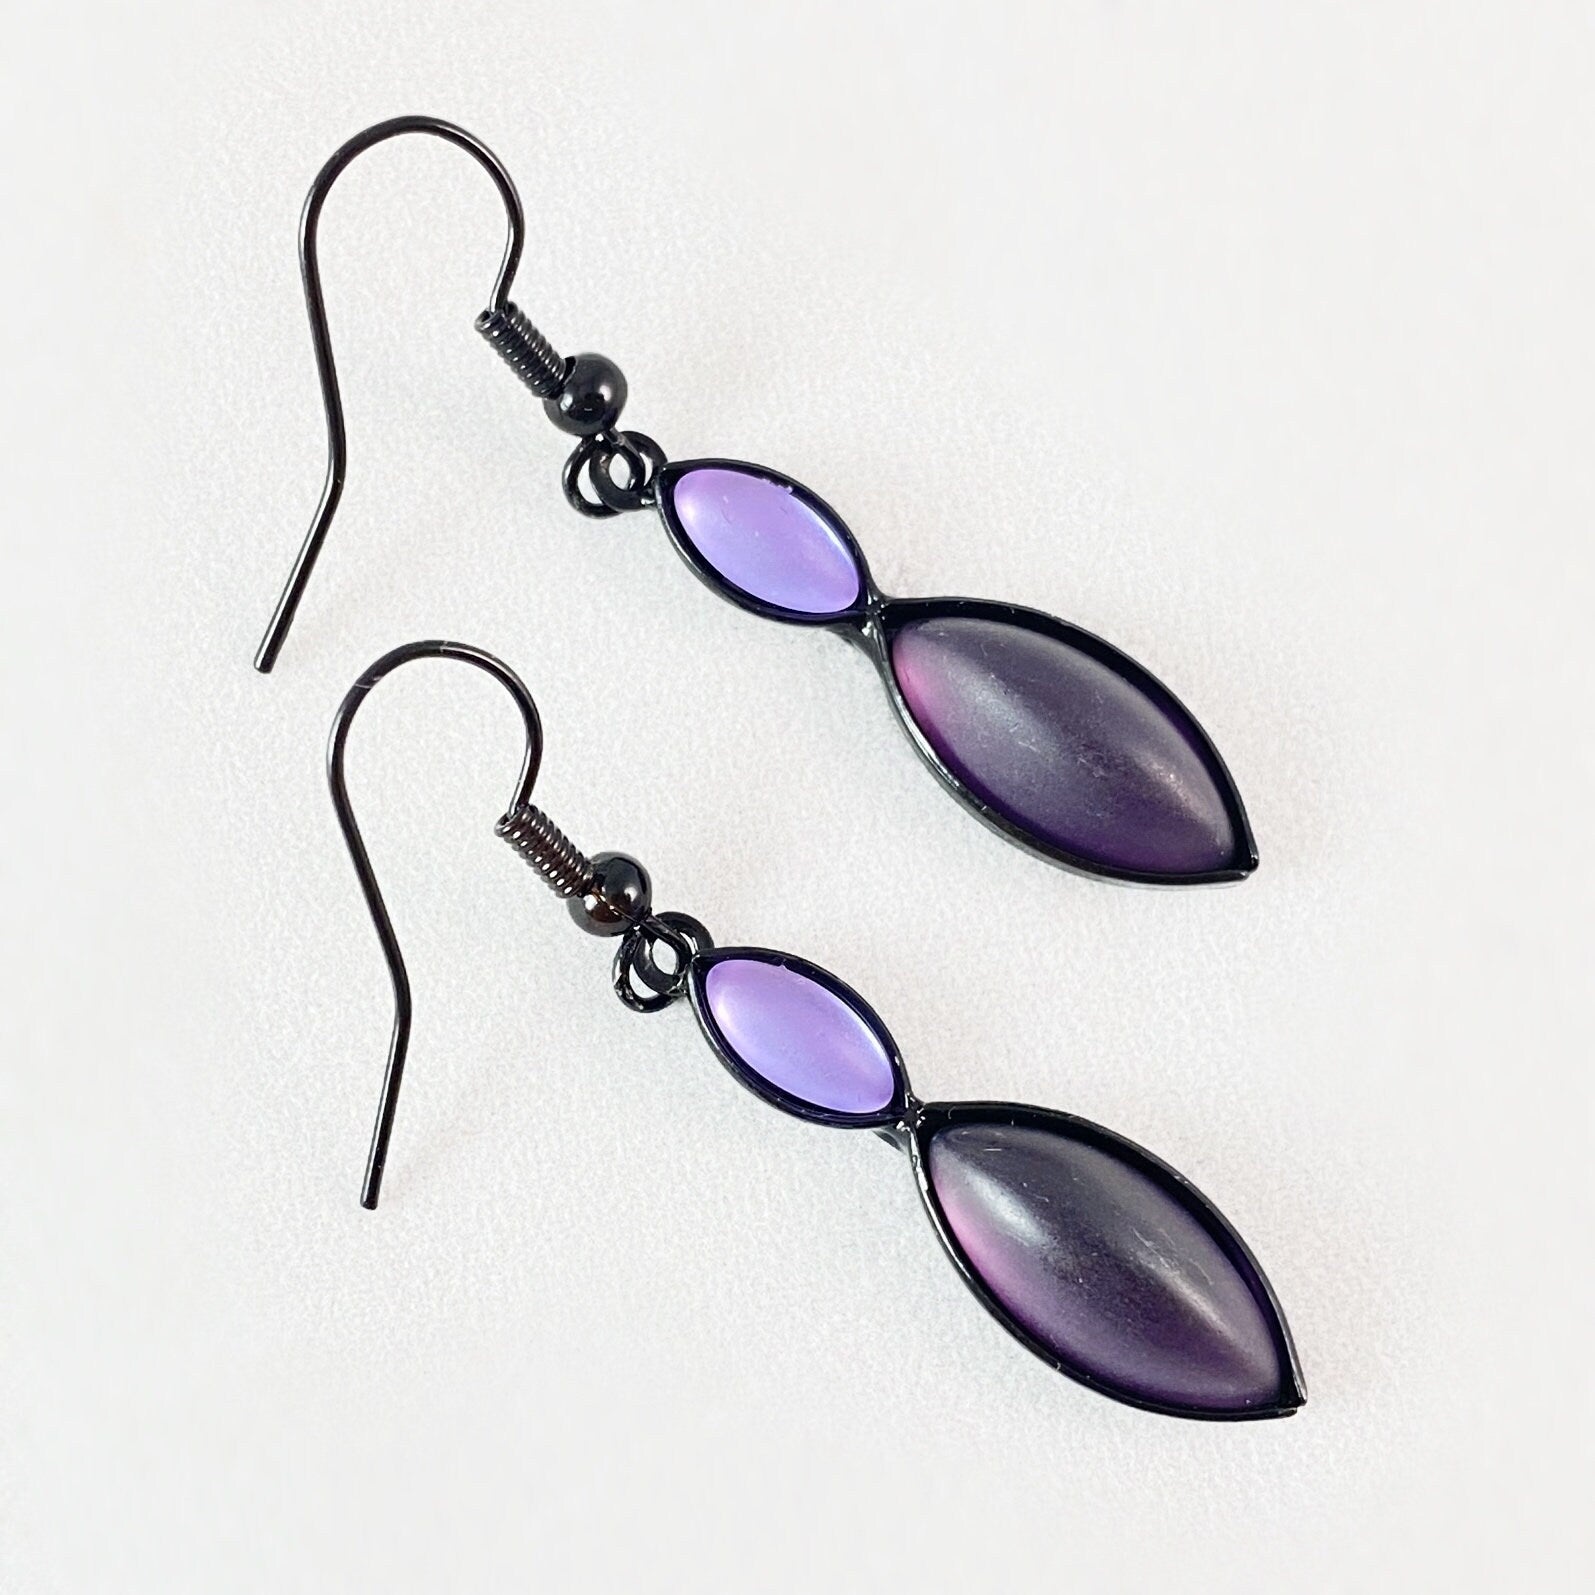 Marquise Shape Earrings with Black Wire and Handmade Glass Beads, Hypoallergenic, Violet/Purple - Kristina